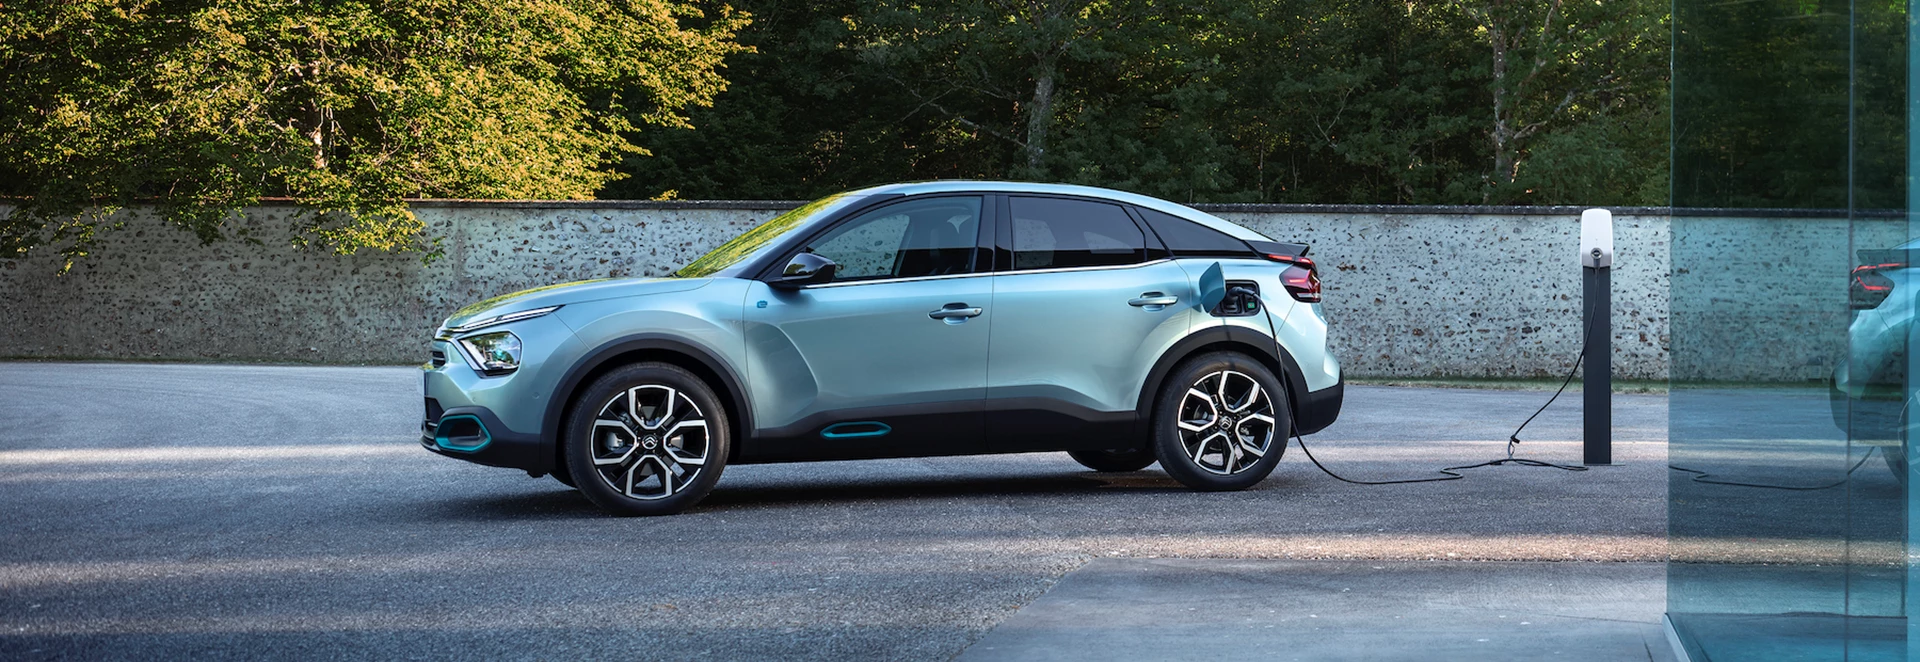 5 brand new electric cars worth considering 